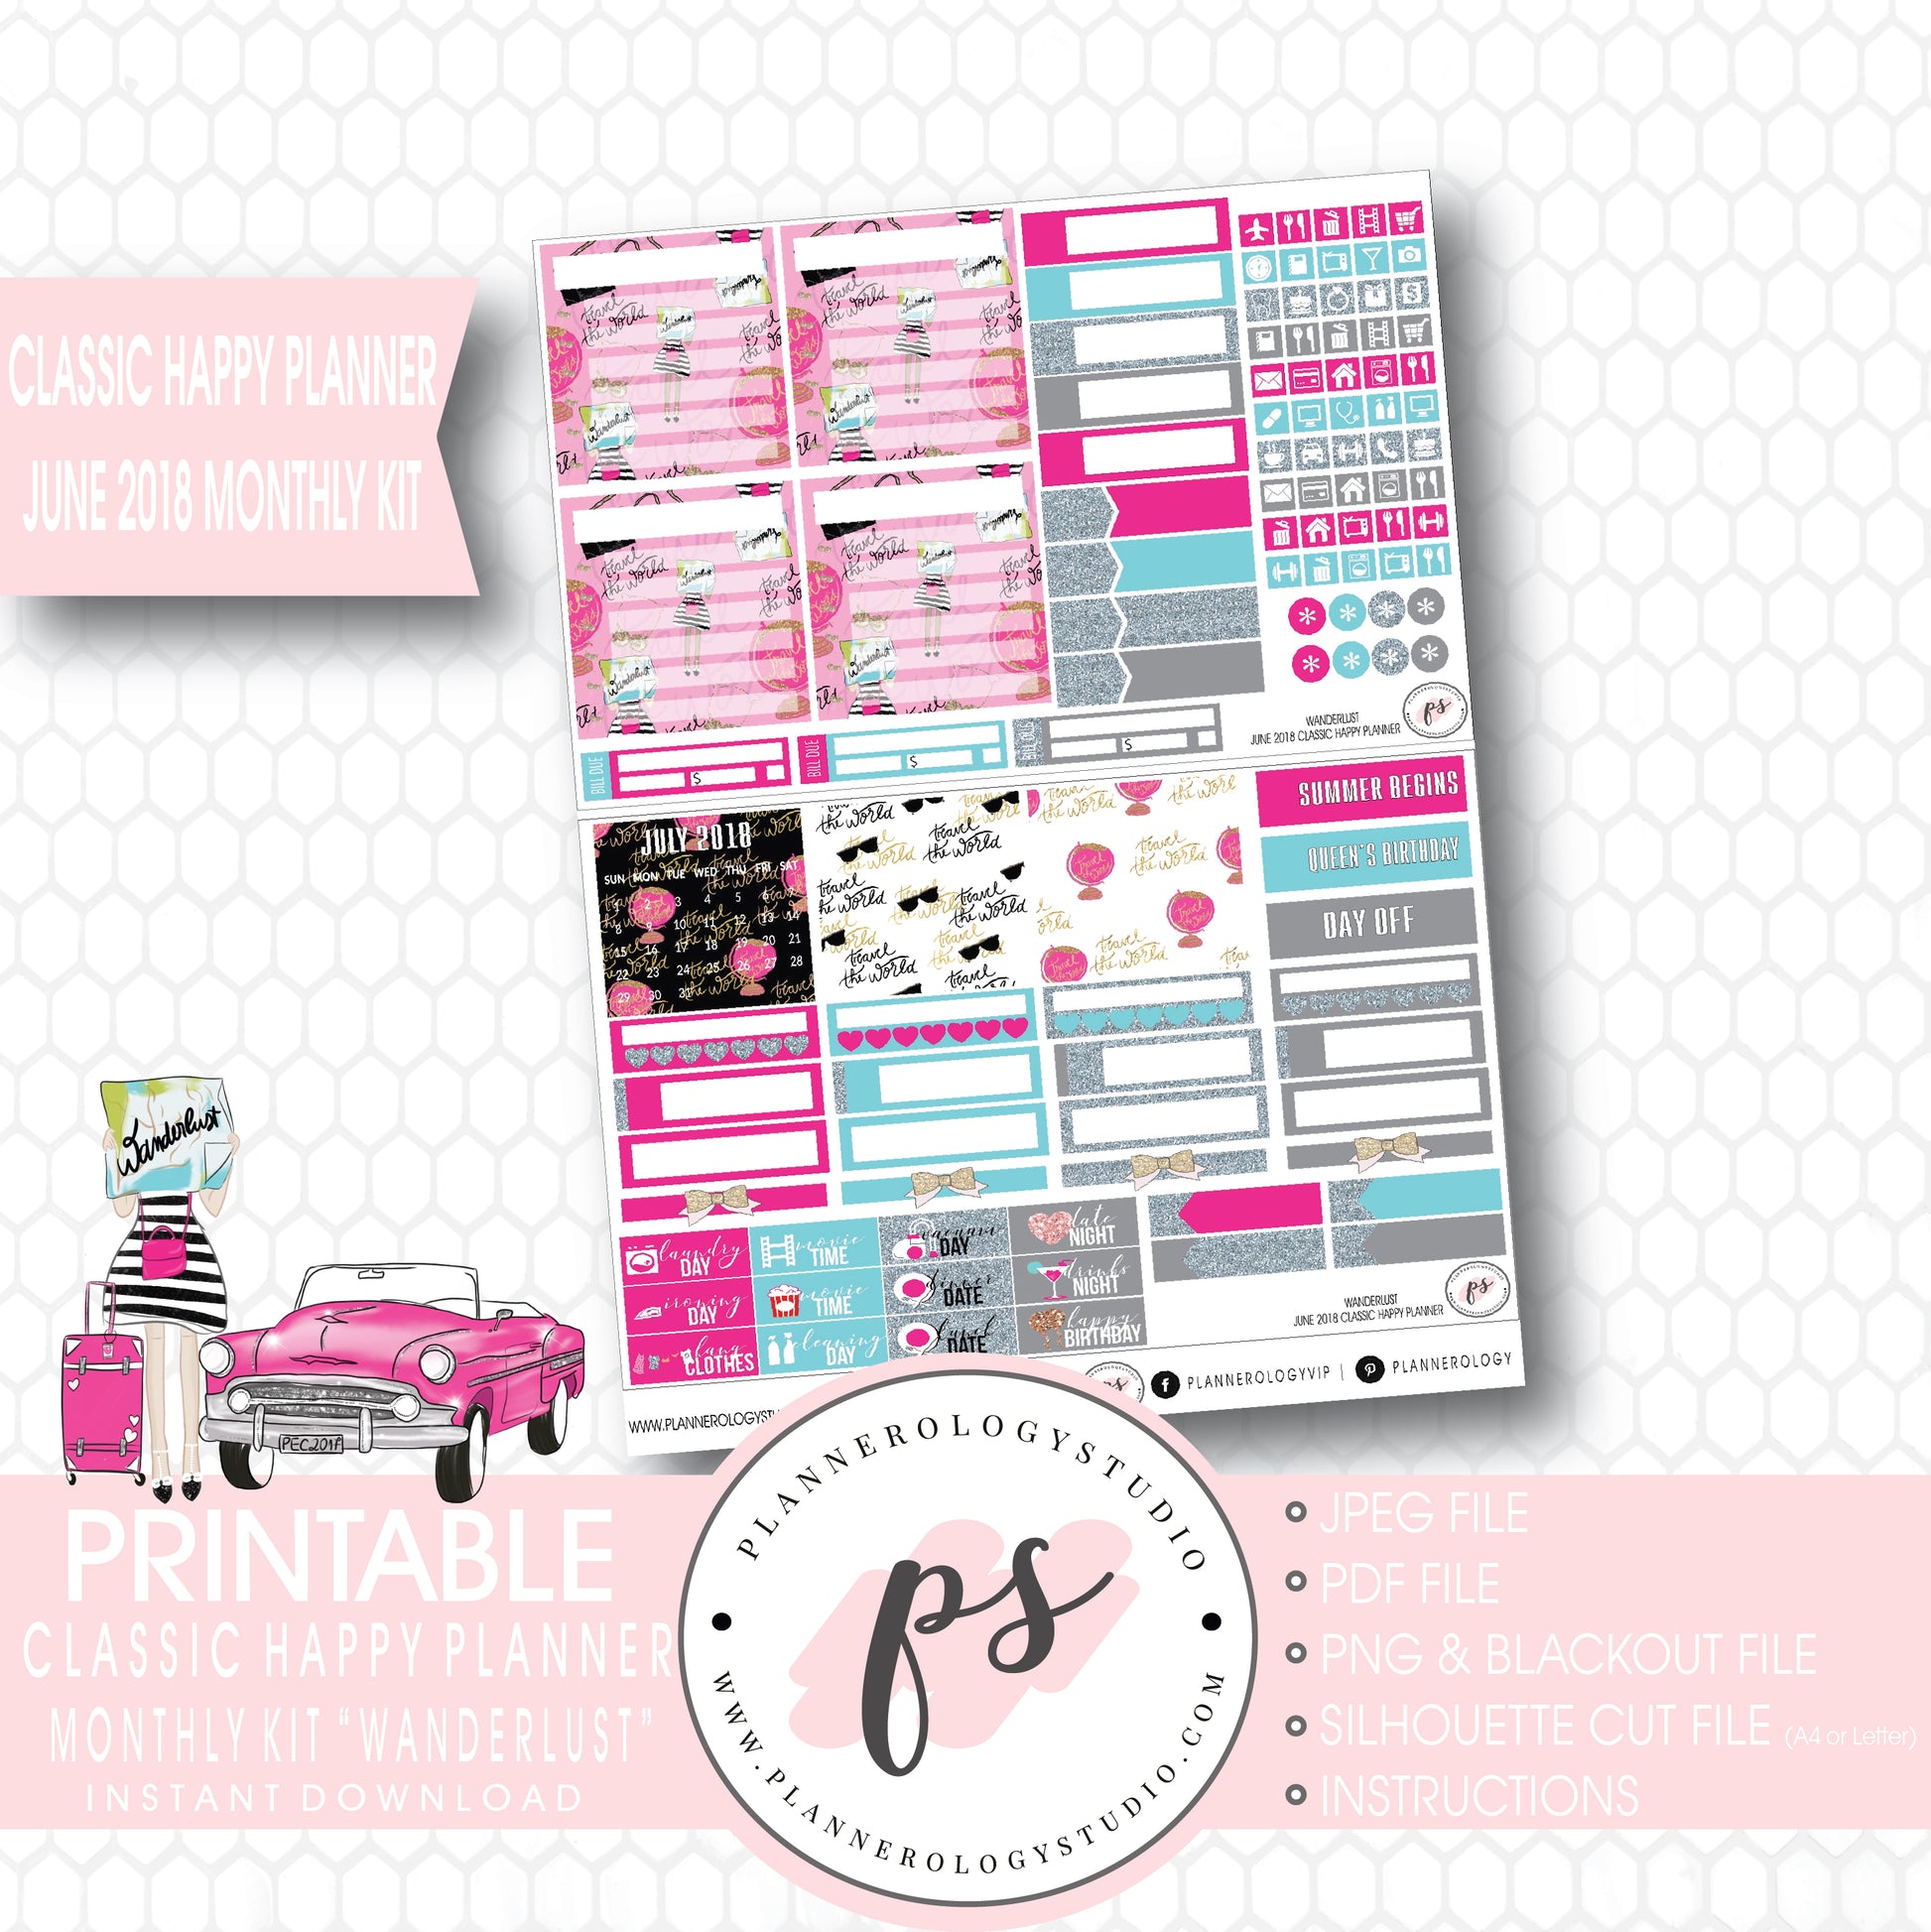 Wanderlust June 2018 Monthly View Kit Digital Printable Planner Stickers (for use with Classic Happy Planner) - Plannerologystudio